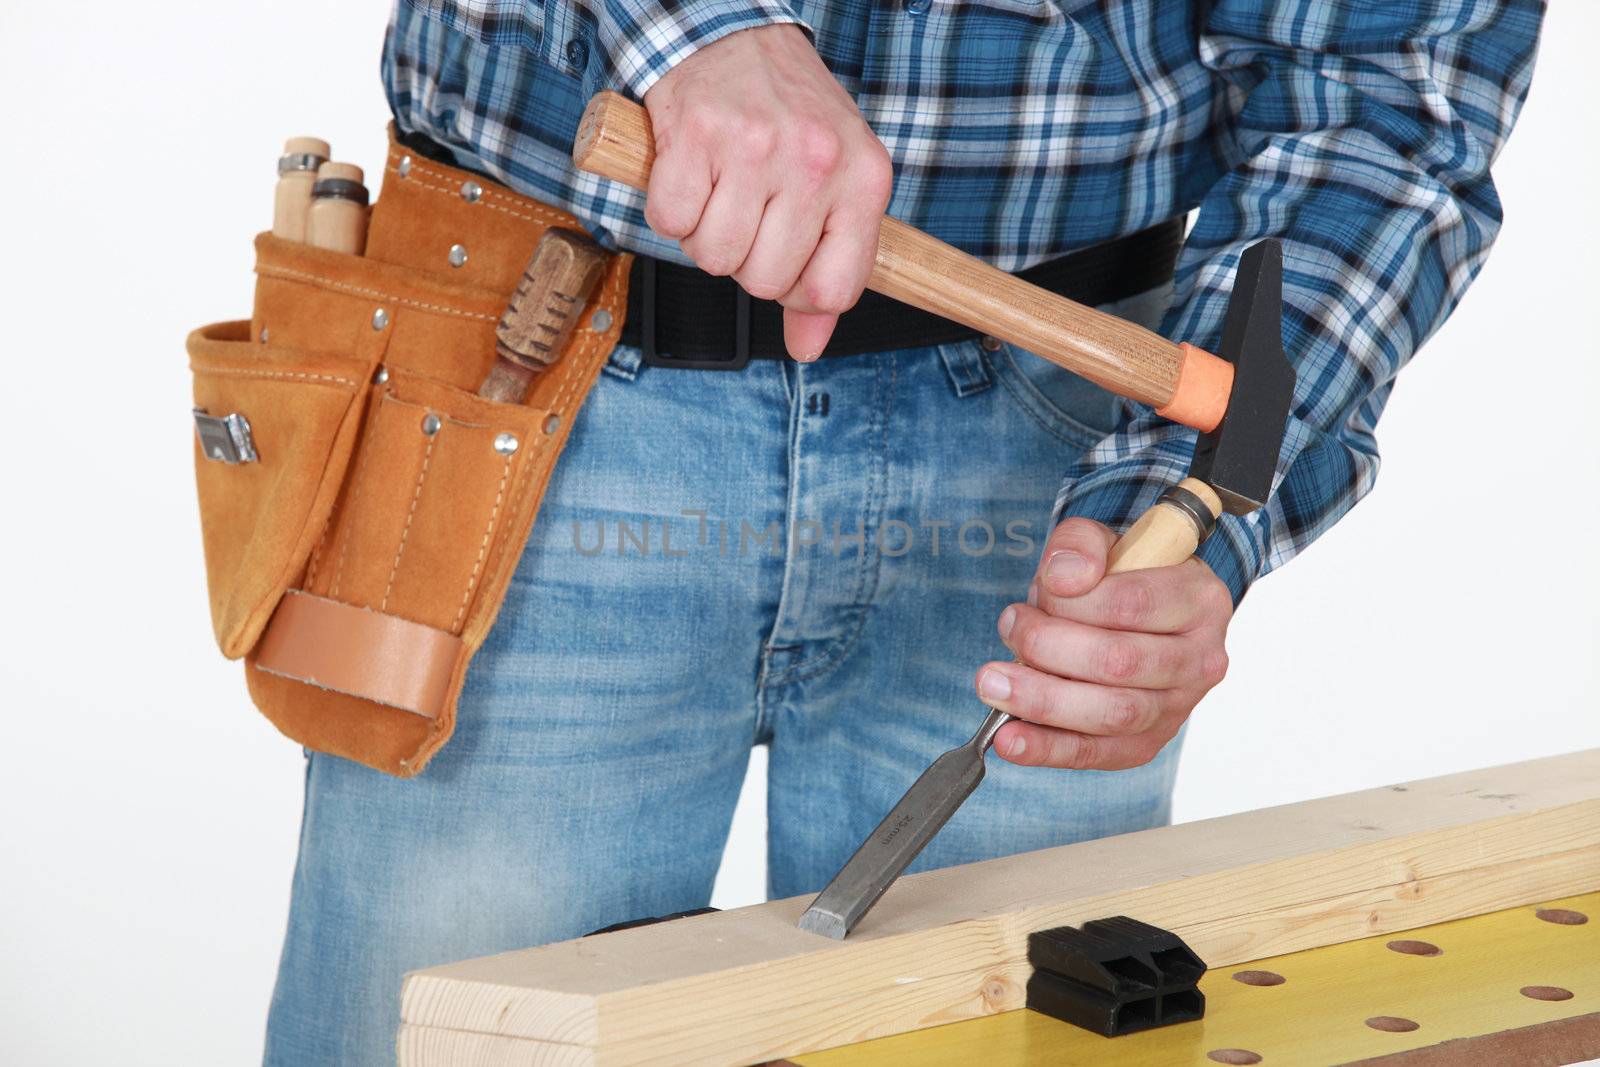 Tradesman chiseling a plank of wood by phovoir